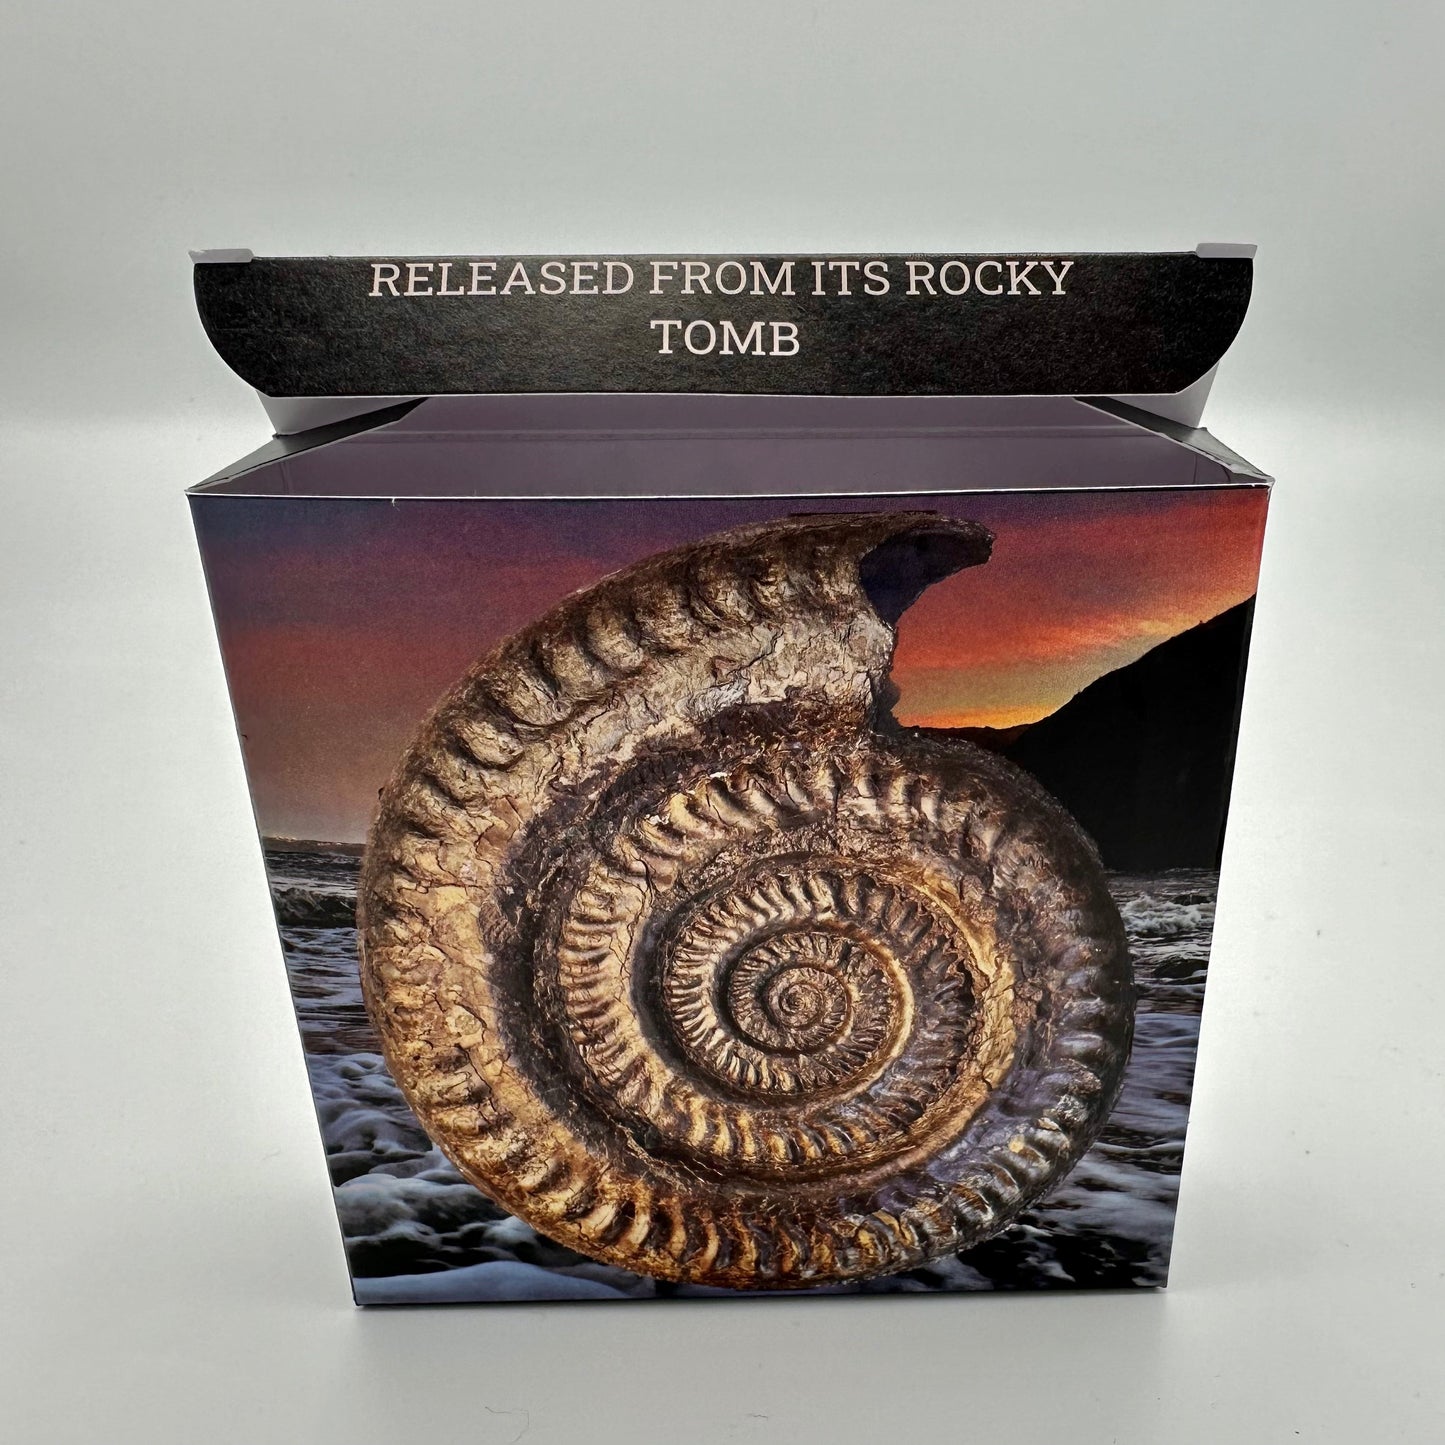 Polished Madagascan Ammonite Fossil With Box And Display Case - Cretaceous Ammonite Fossil